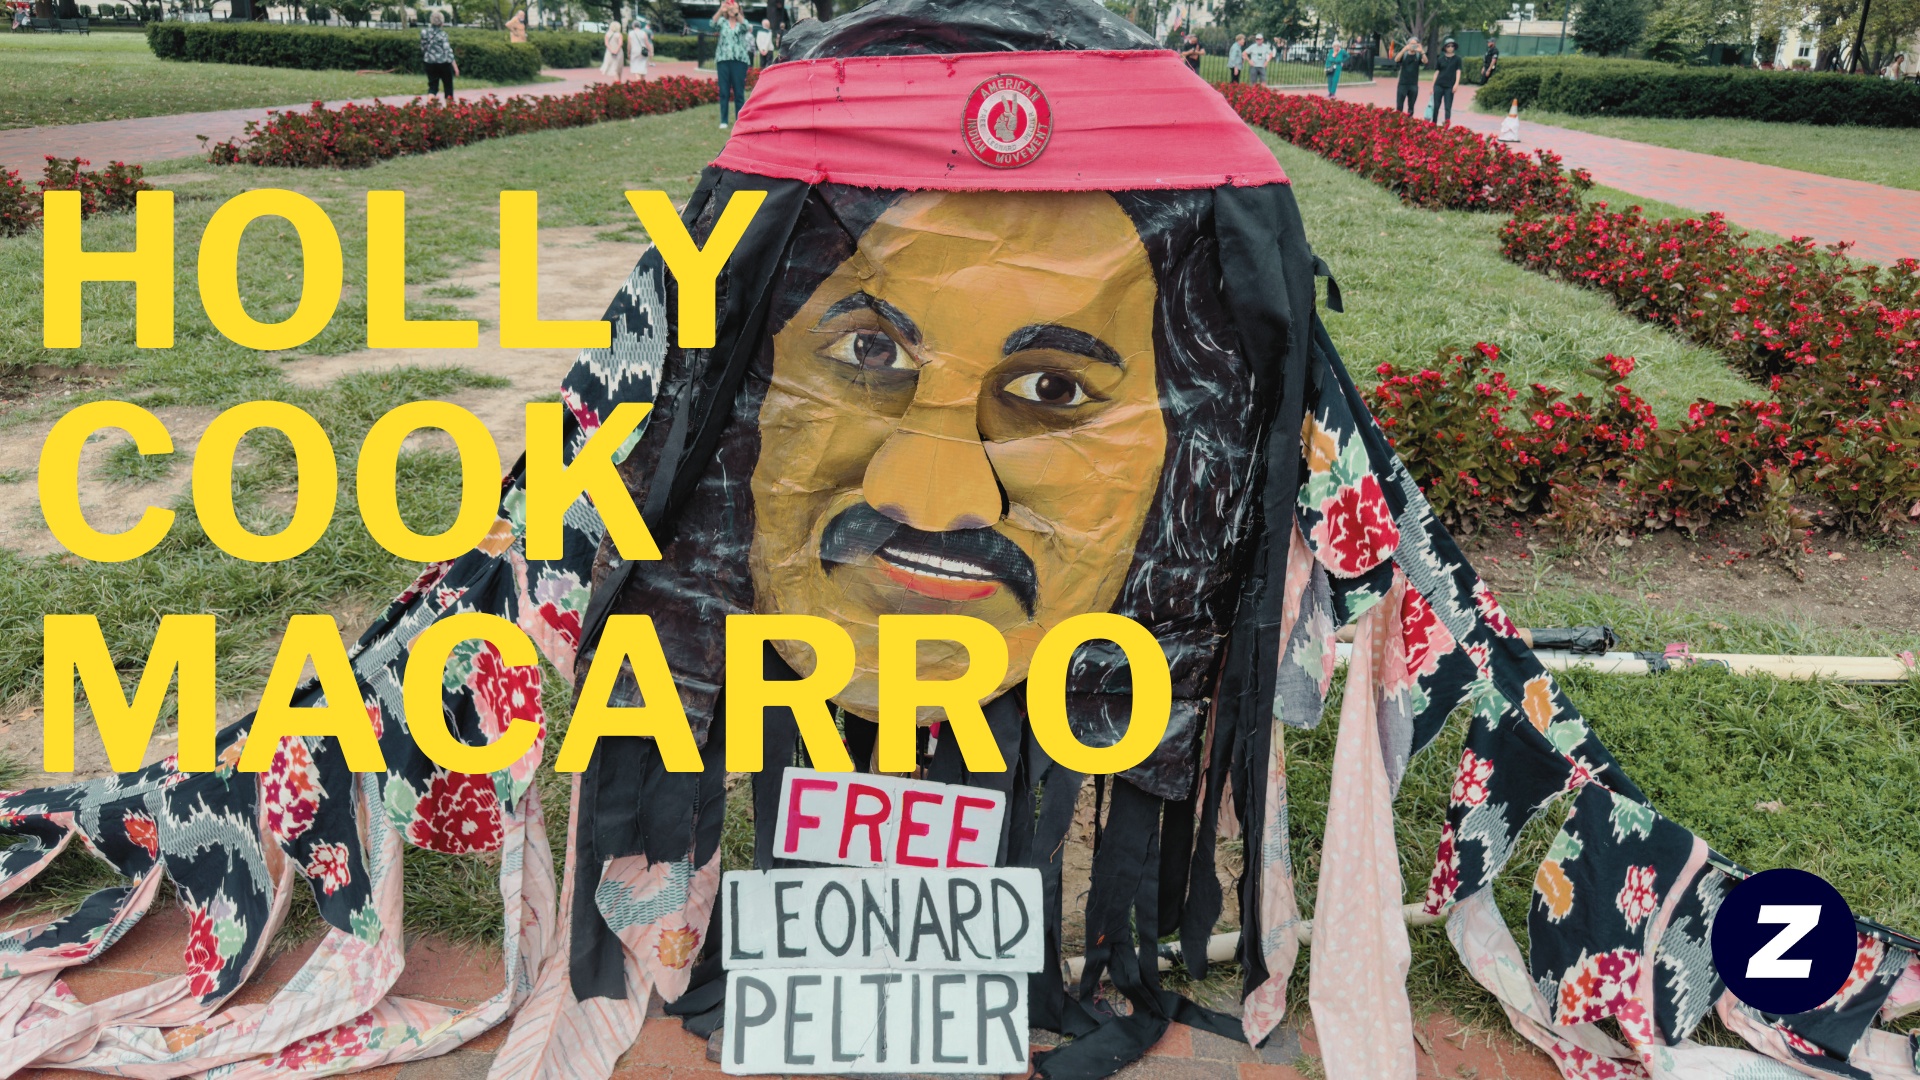 'We are still here': Holly Cook Macarro at White House Rally for Leonard Peltier